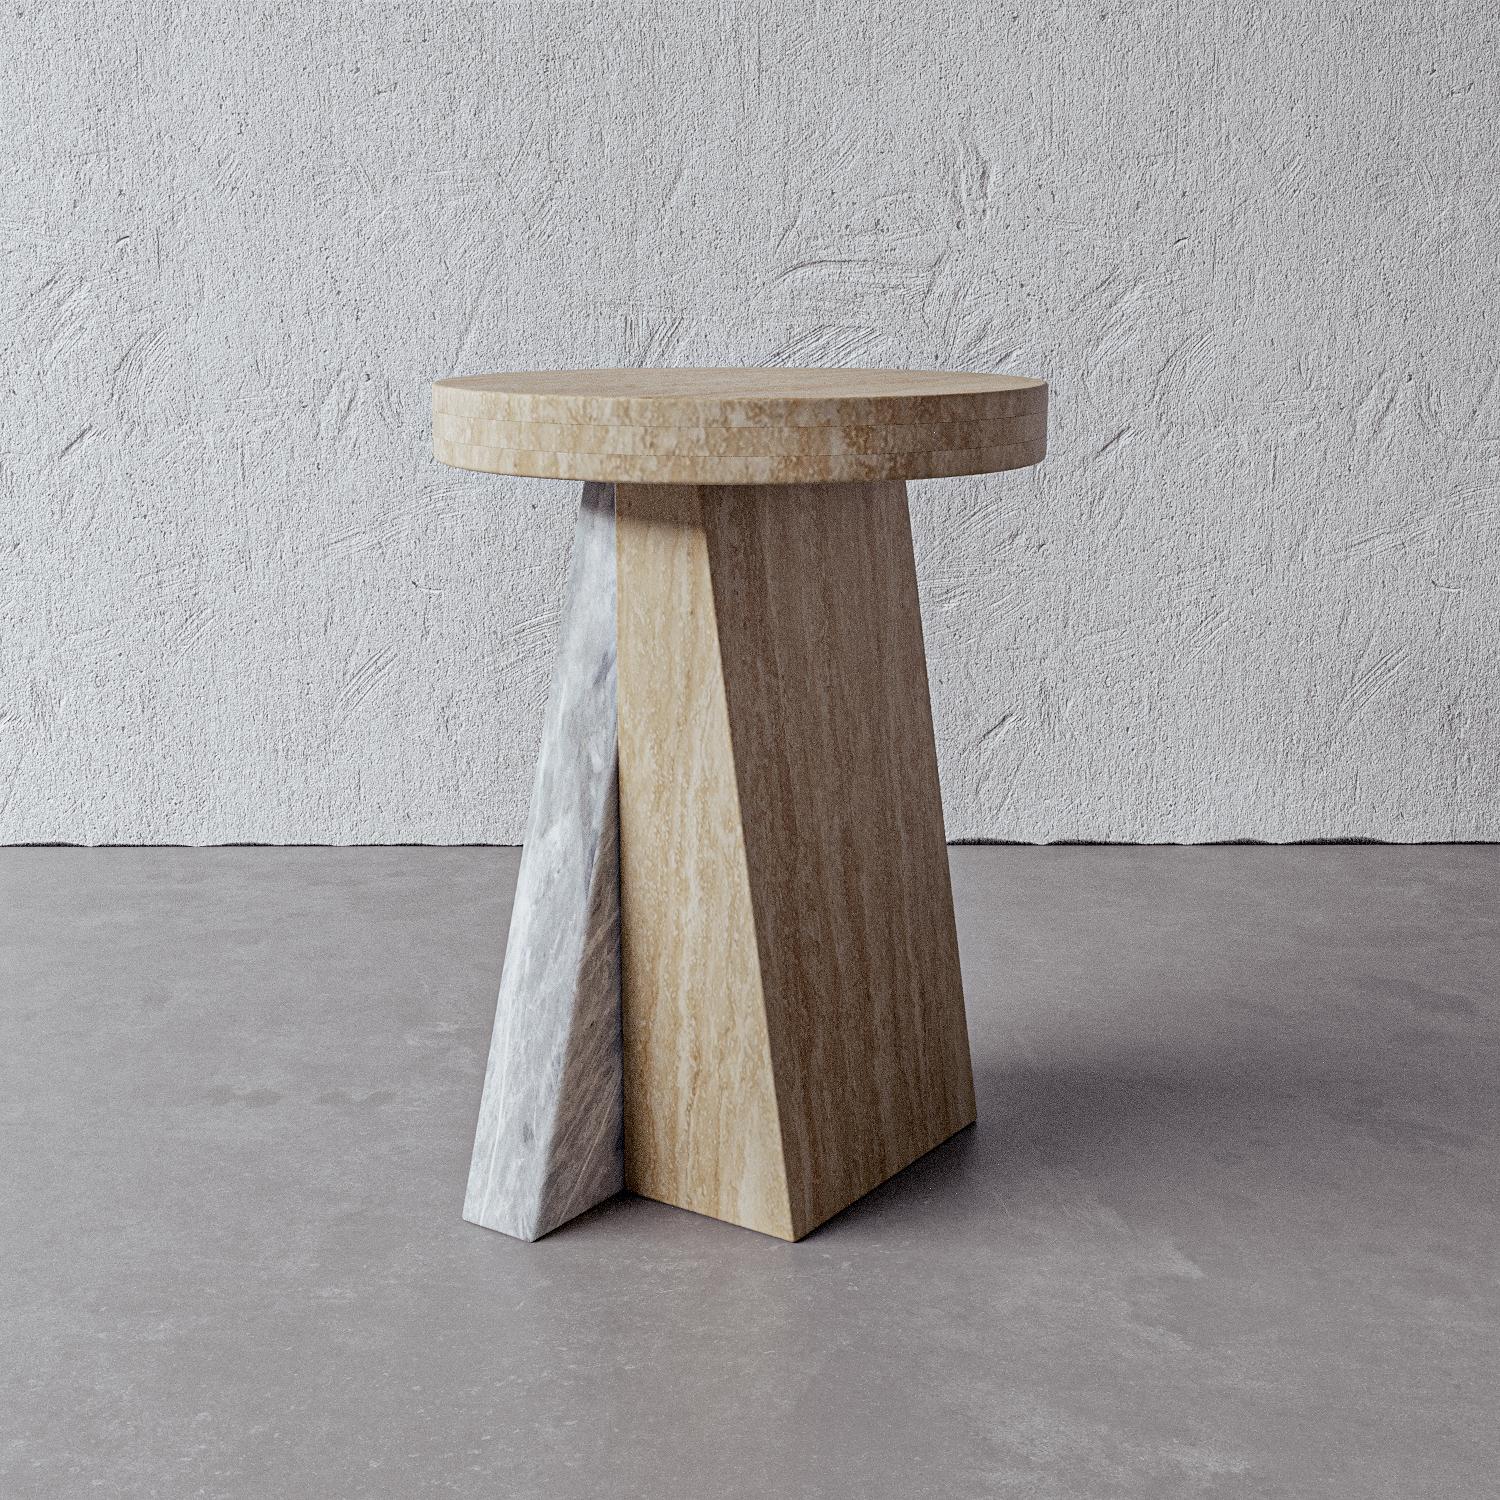 This asymmetrical side table inspired by modern sculpture features an angular mixed slab base in grey and cream travertine with a honed travertine top. Handmade by artisans in Vietnam, this piece adds a feminine depth to any space.